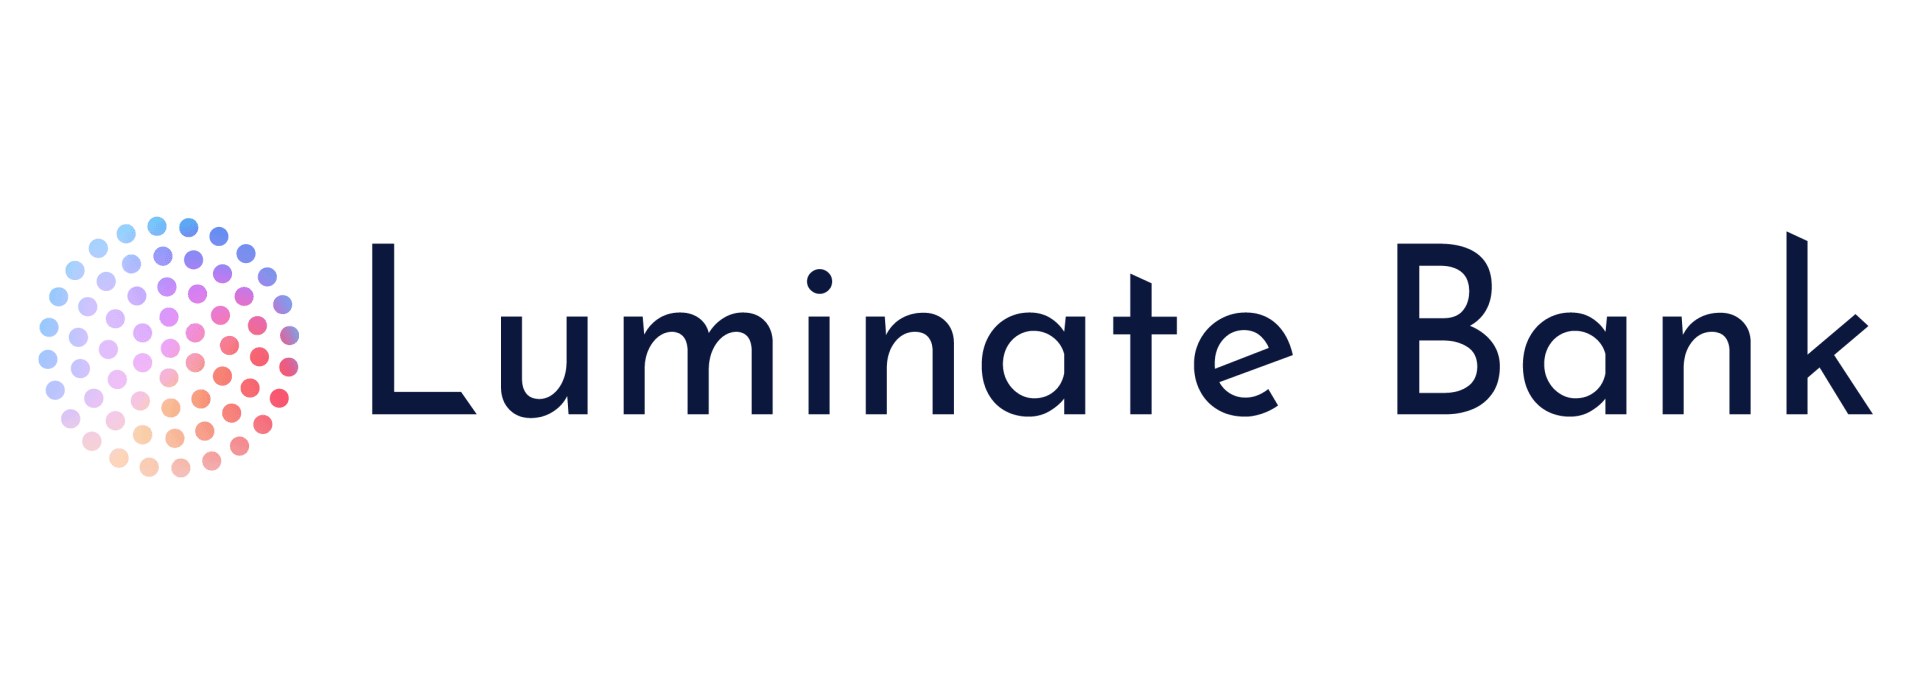 The logo for luminate bank is a circle with dots on it.